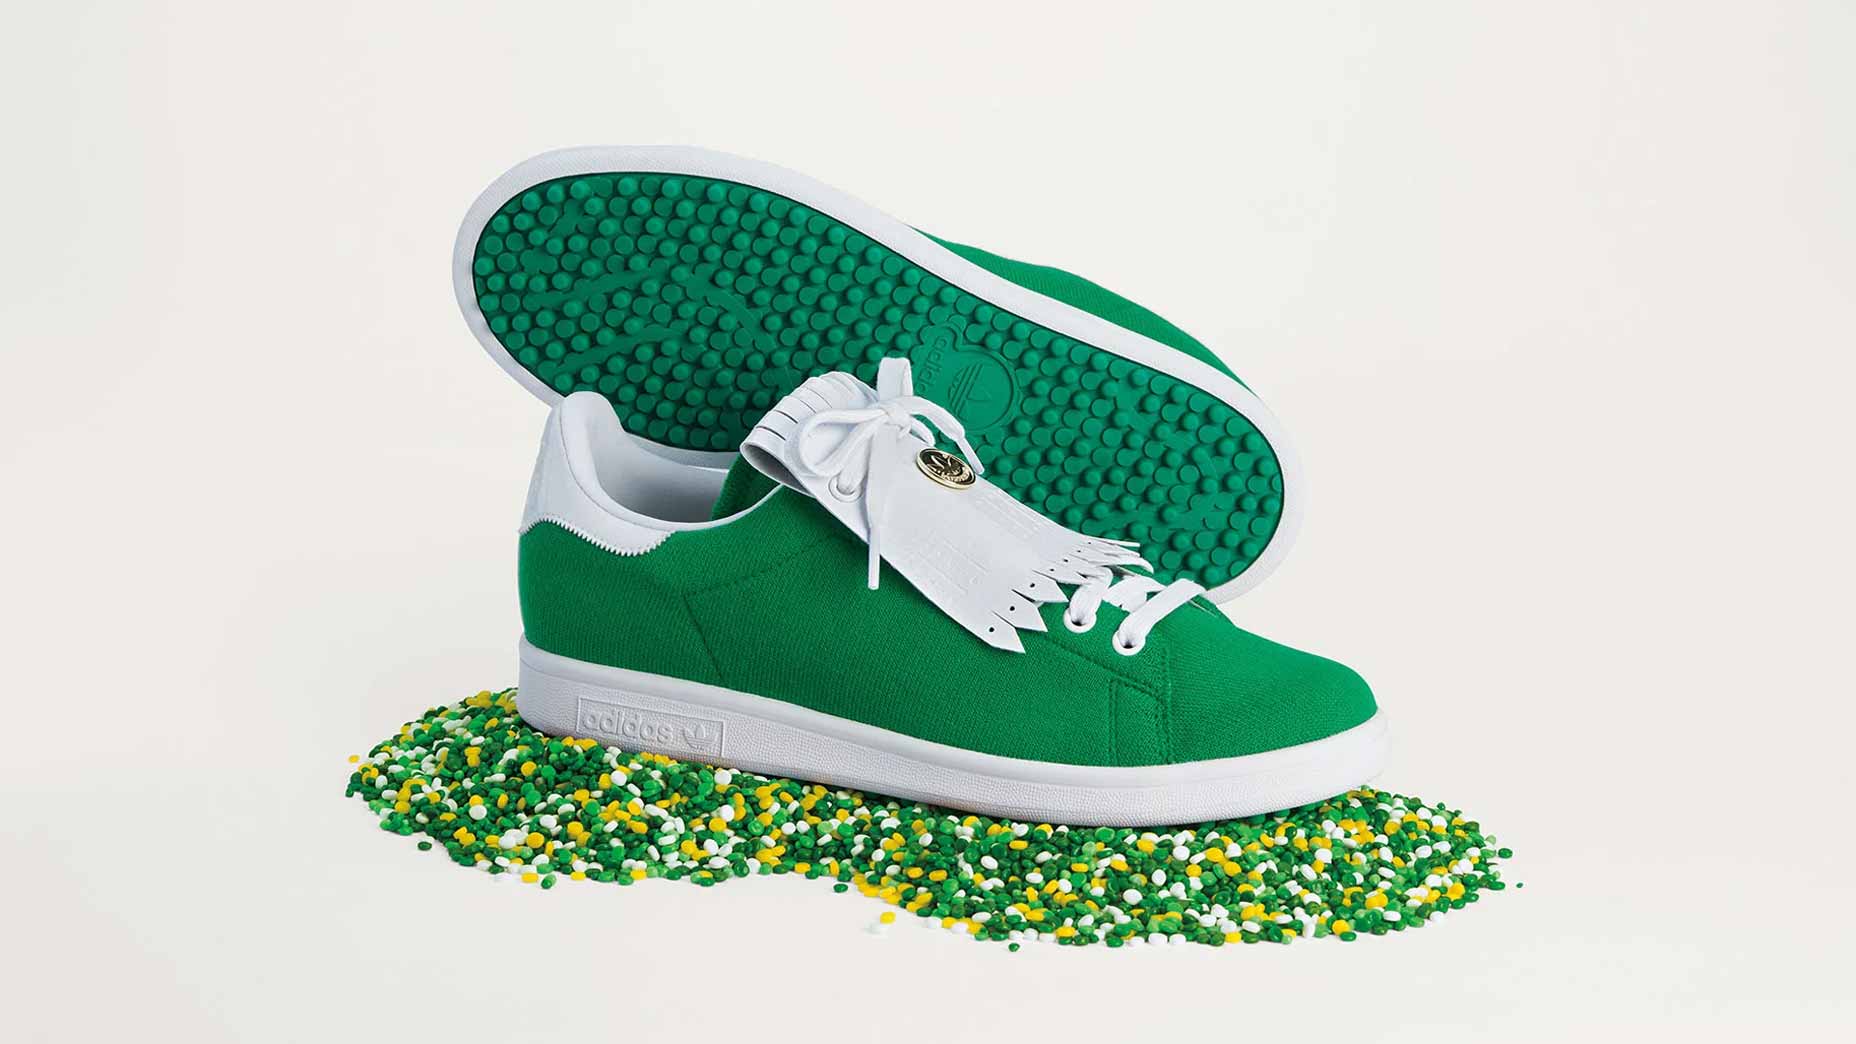 Adidas releases new Stan Smith golf shoes ahead of 2021 Masters تاريخ البيتزا